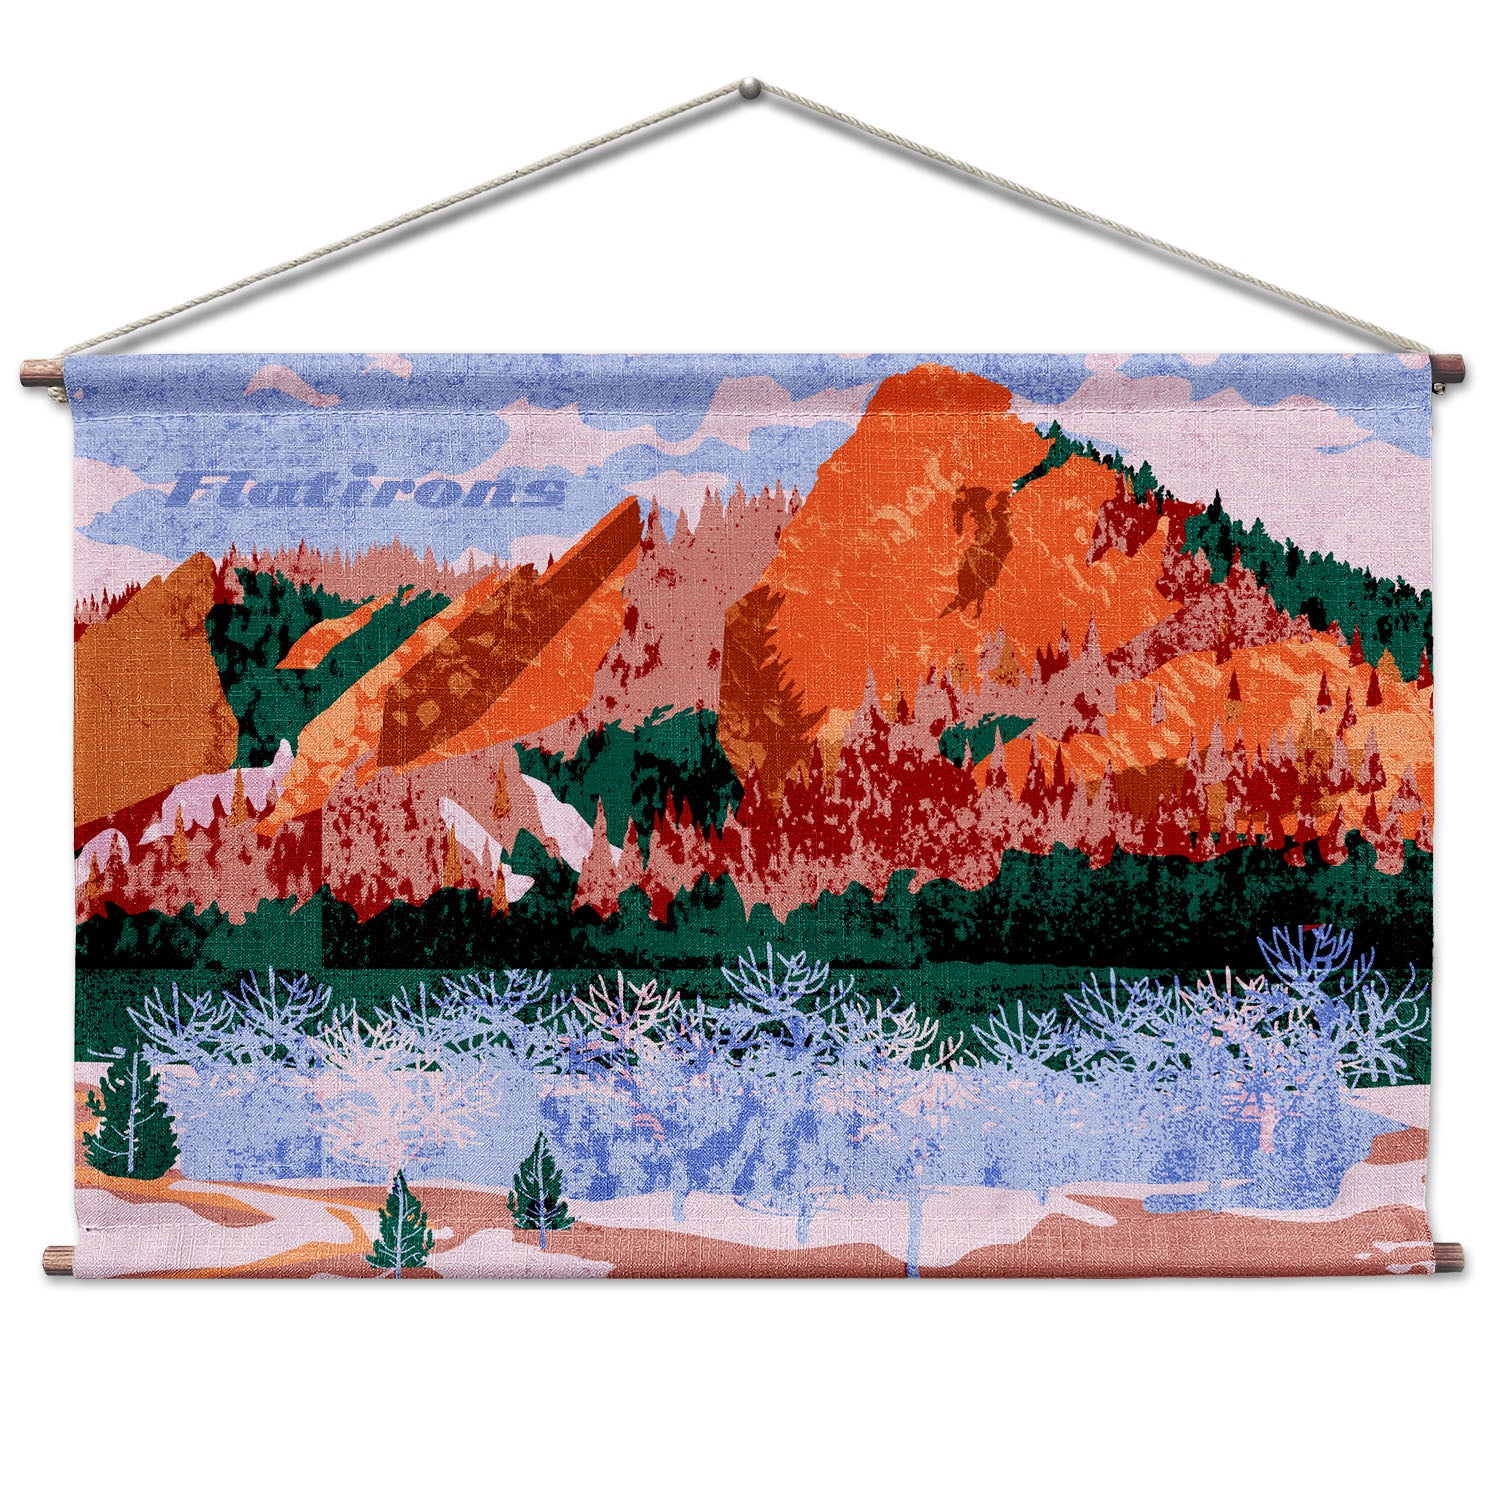 Flatirons Abstract Landscape Wall Hanging - Walnut -  - Knotty Tie Co.